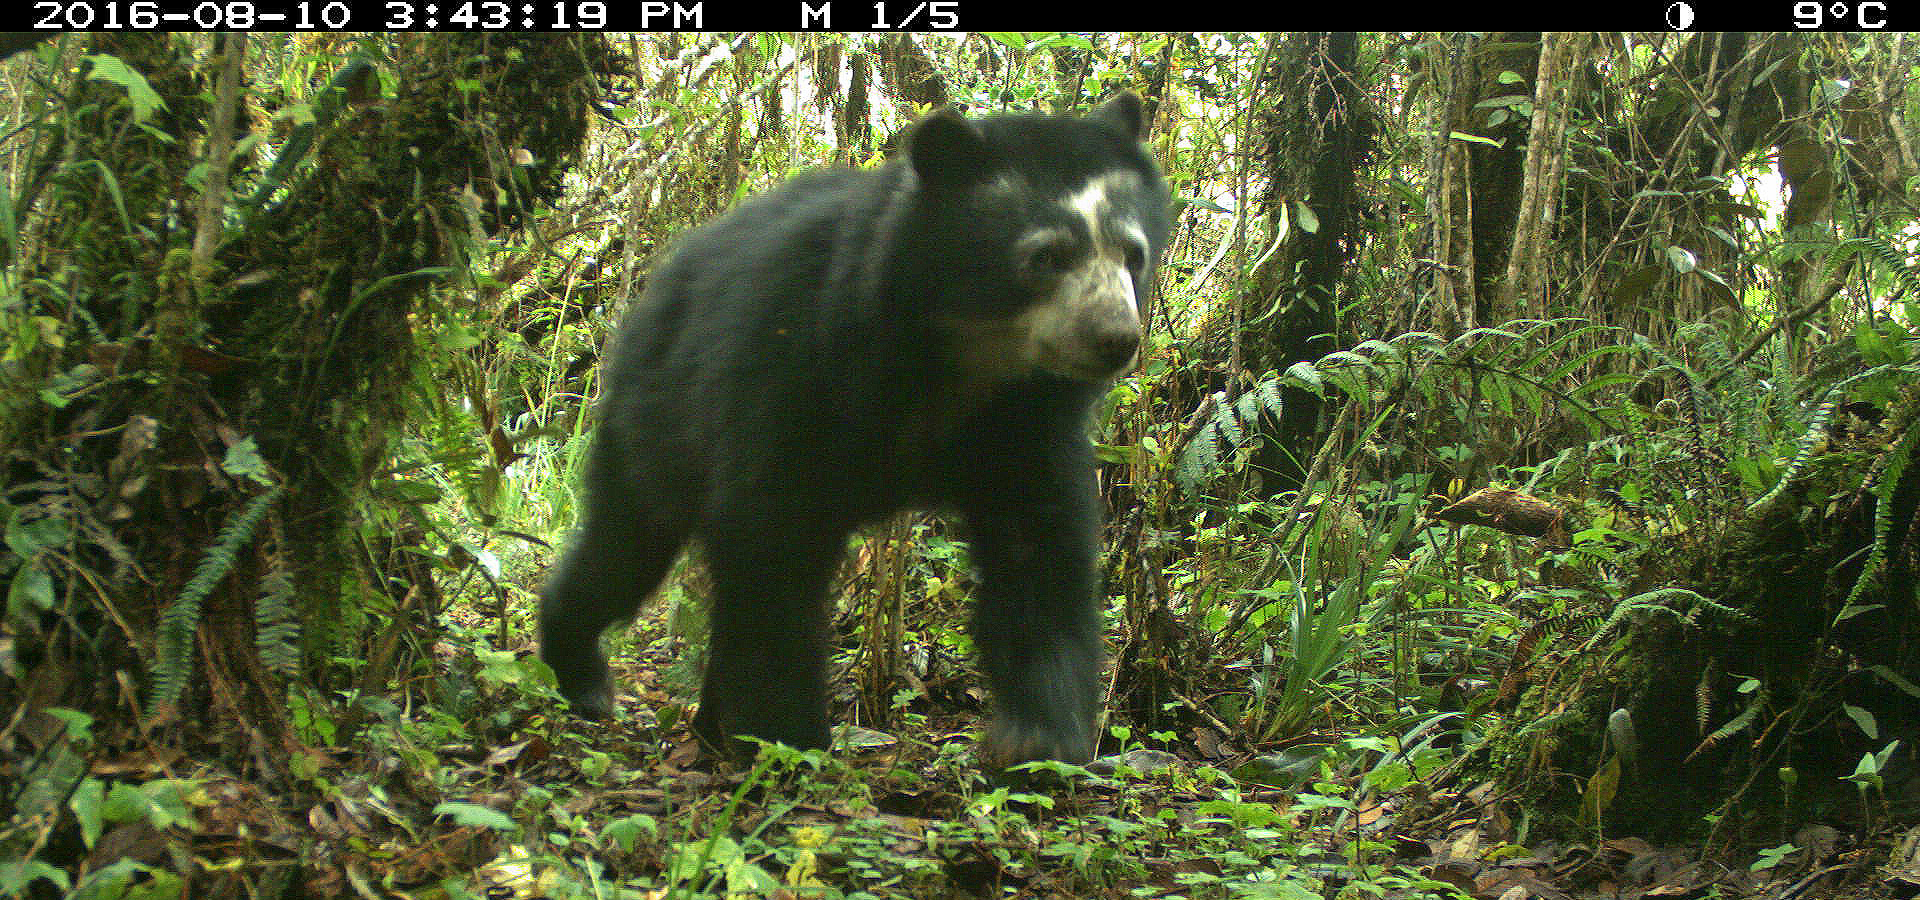 A spectacled bear (Tremarctos ornatus), also known as the Andean bear.